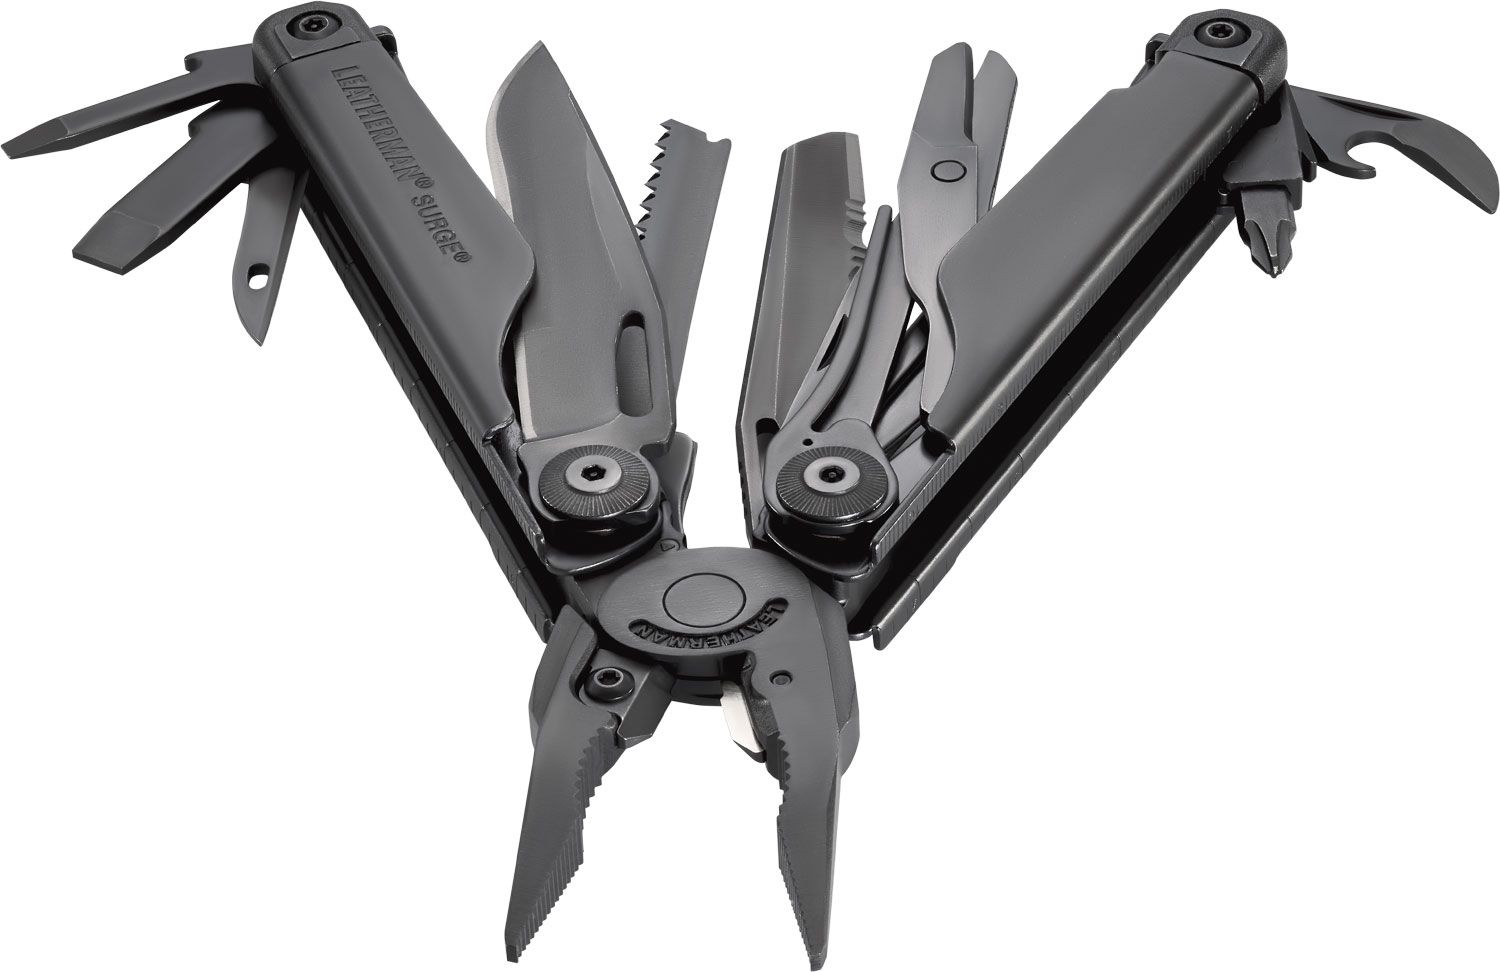 Leatherman SURGE - 830278A MULTI-TOOLS AND KNIVES